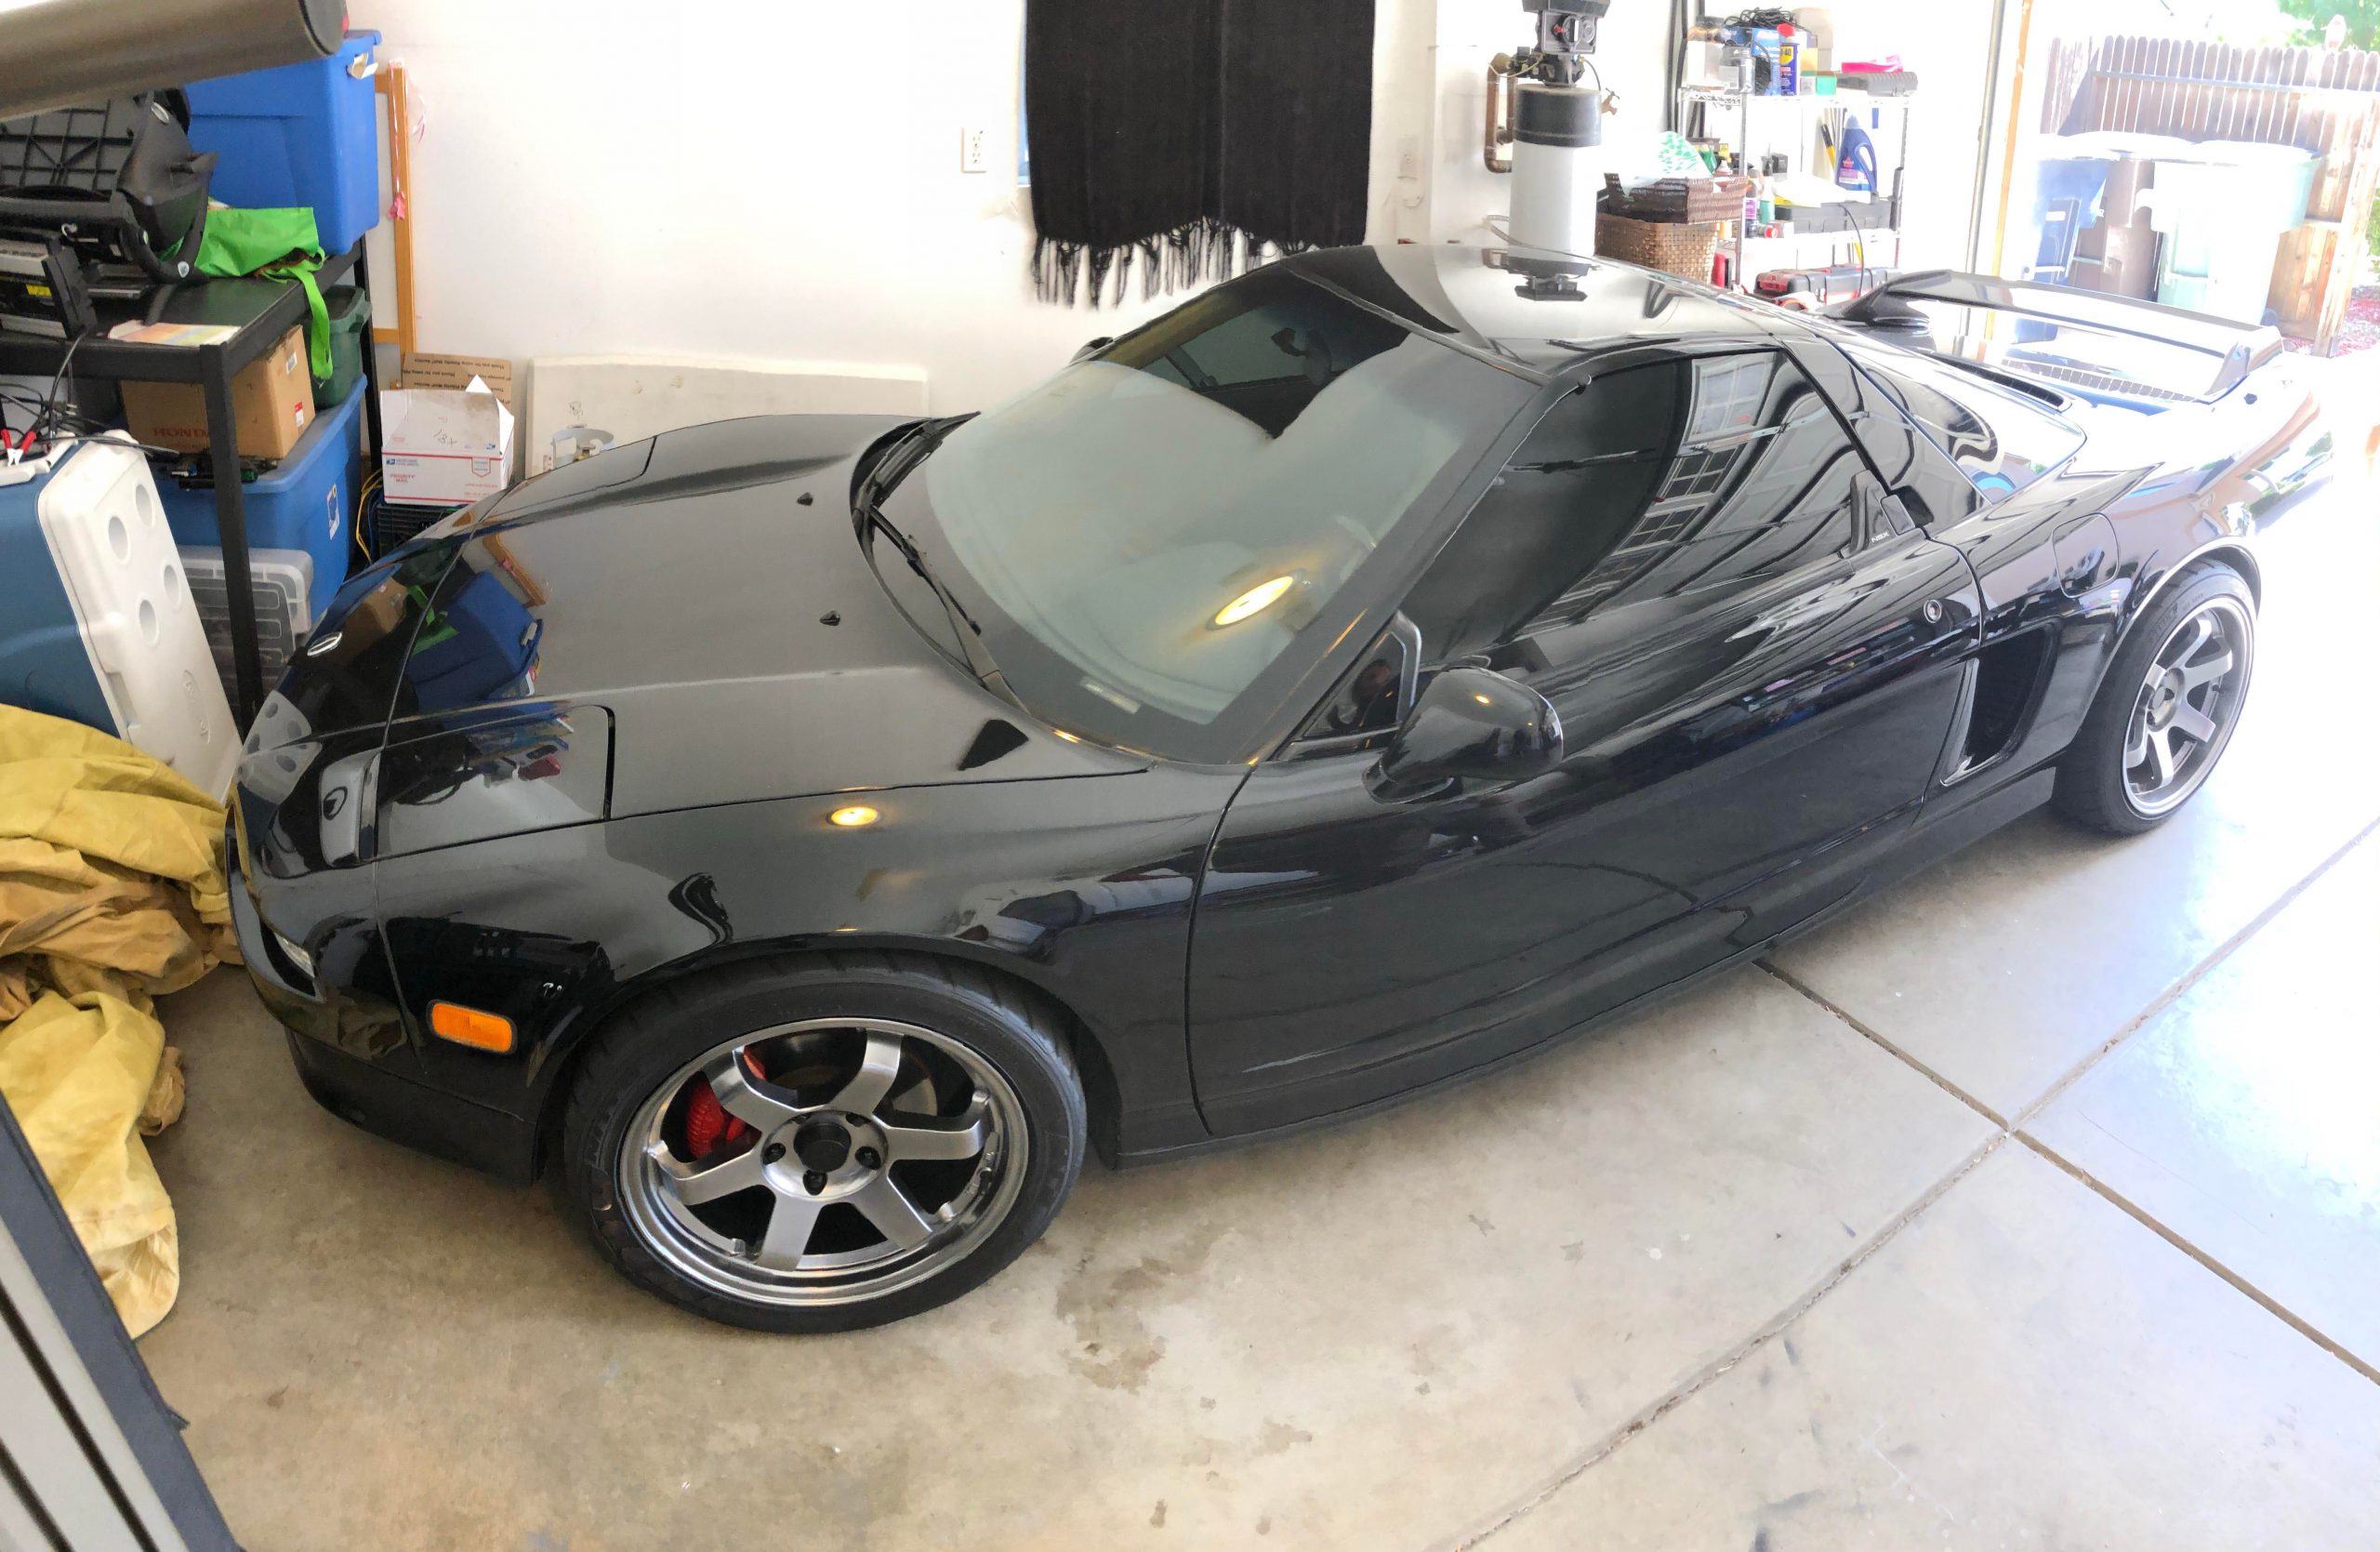 A ‘94 NSX My Dad detailed yesterday